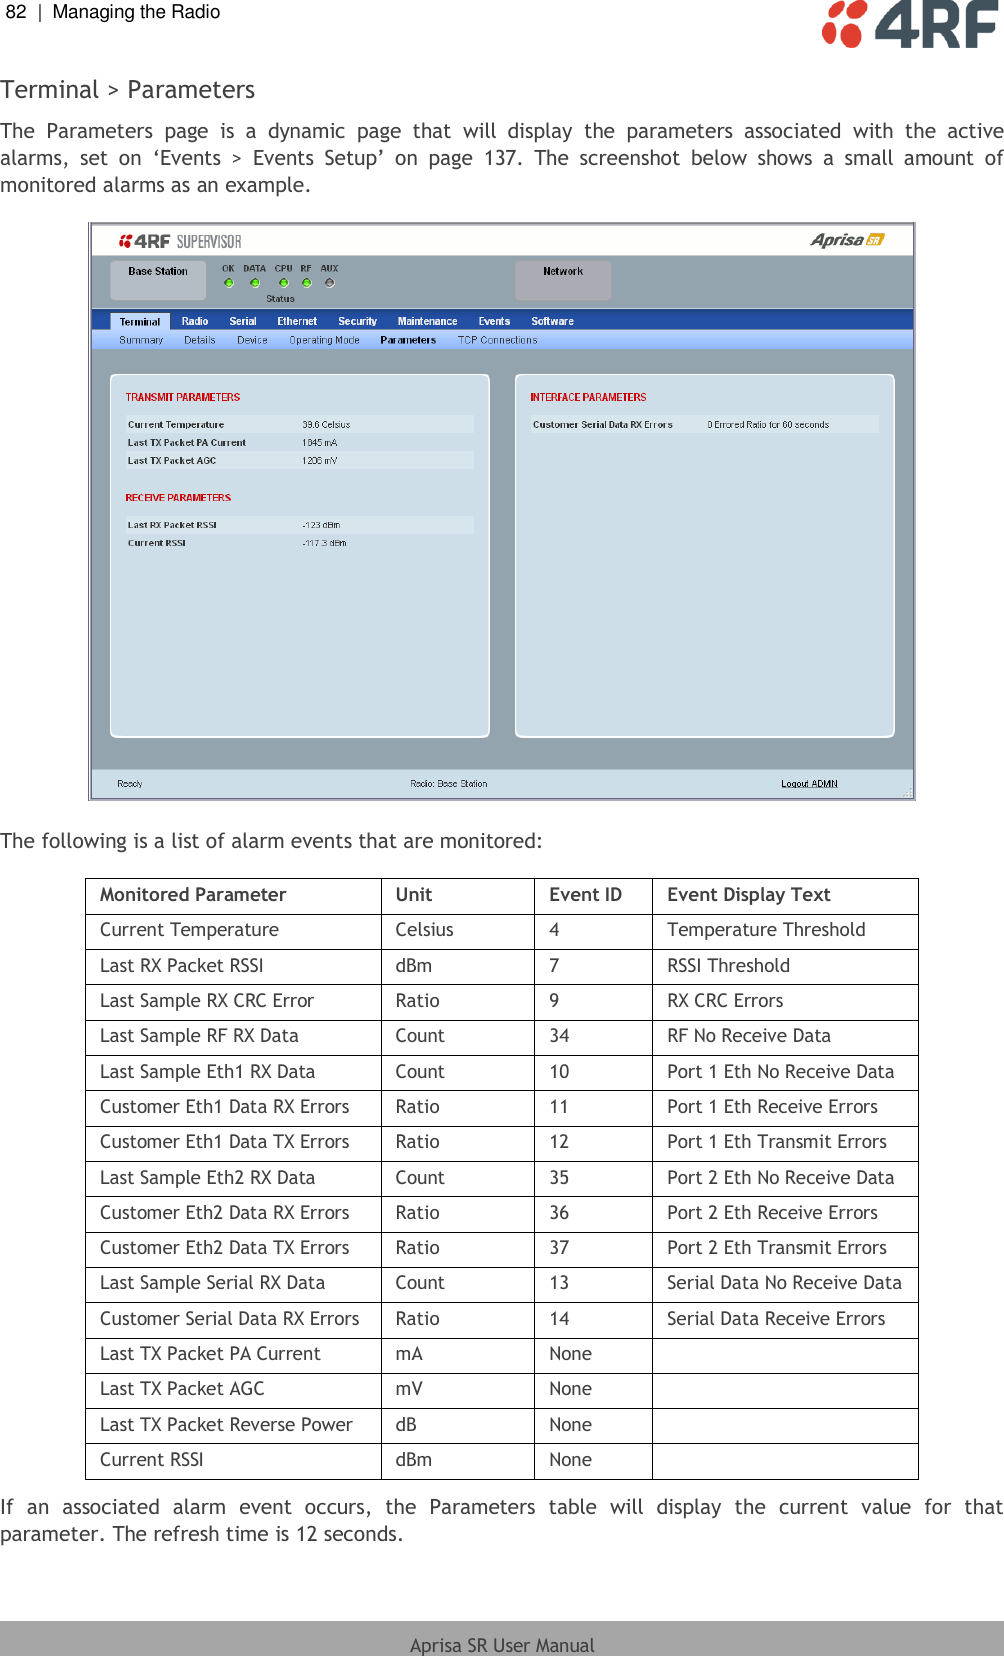 82  |  Managing the Radio   Aprisa SR User Manual  Terminal &gt; Parameters The  Parameters  page  is  a  dynamic  page  that  will  display  the  parameters  associated  with  the  active alarms,  set  on  ‘Events  &gt;  Events  Setup’  on  page  137.  The  screenshot  below  shows  a  small  amount  of monitored alarms as an example.    The following is a list of alarm events that are monitored:  Monitored Parameter Unit Event ID Event Display Text Current Temperature  Celsius 4 Temperature Threshold Last RX Packet RSSI dBm 7 RSSI Threshold Last Sample RX CRC Error  Ratio 9 RX CRC Errors Last Sample RF RX Data  Count 34 RF No Receive Data Last Sample Eth1 RX Data  Count 10 Port 1 Eth No Receive Data Customer Eth1 Data RX Errors  Ratio 11 Port 1 Eth Receive Errors Customer Eth1 Data TX Errors  Ratio 12 Port 1 Eth Transmit Errors Last Sample Eth2 RX Data  Count 35 Port 2 Eth No Receive Data Customer Eth2 Data RX Errors  Ratio 36 Port 2 Eth Receive Errors Customer Eth2 Data TX Errors  Ratio 37 Port 2 Eth Transmit Errors Last Sample Serial RX Data  Count 13 Serial Data No Receive Data Customer Serial Data RX Errors  Ratio 14 Serial Data Receive Errors Last TX Packet PA Current  mA None  Last TX Packet AGC mV None  Last TX Packet Reverse Power dB None  Current RSSI dBm None  If  an  associated  alarm  event  occurs,  the  Parameters  table  will  display  the  current  value  for  that parameter. The refresh time is 12 seconds. 